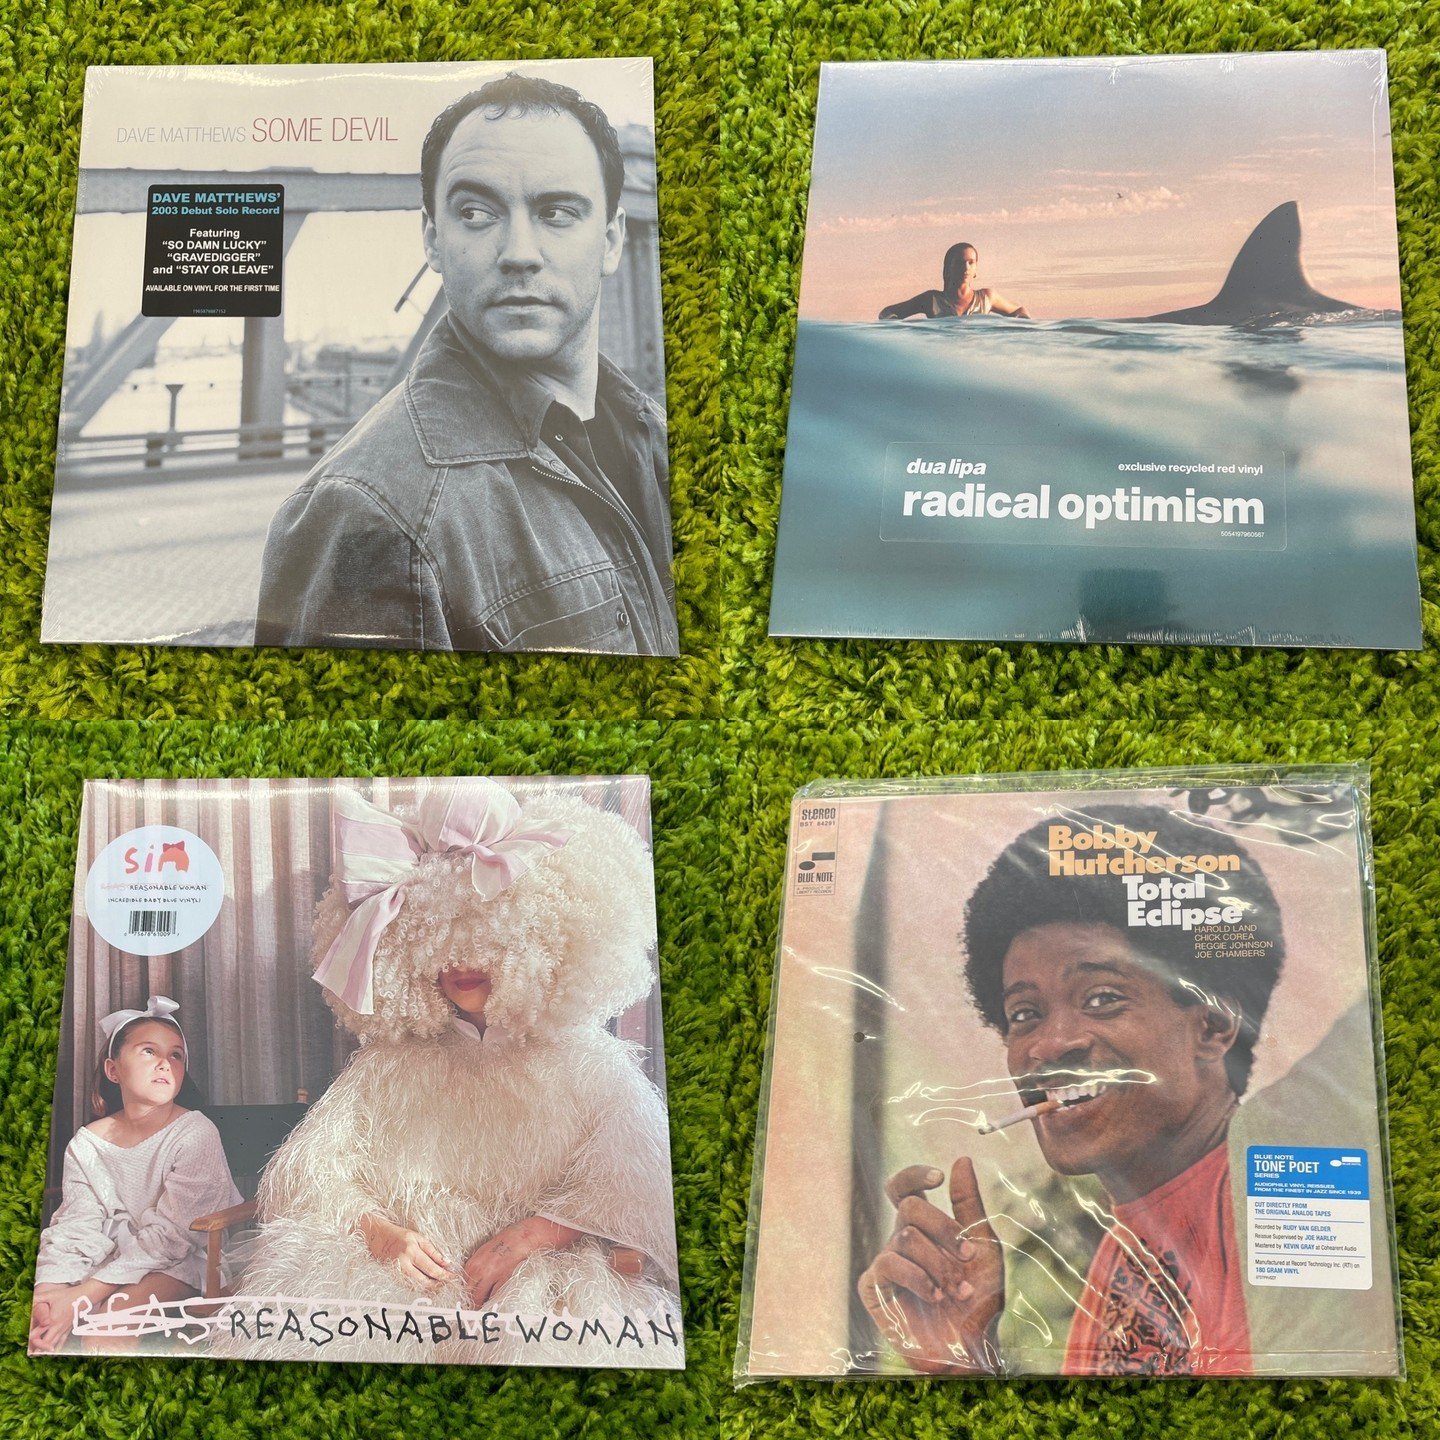 Vinyl New Releases out tomorrow (Friday 5/2)  Dave Matthews, Dua Lipa, Sia, and Bobby Hutcherson (Tone Poet)  Let us know if you would like us to hold any for you!